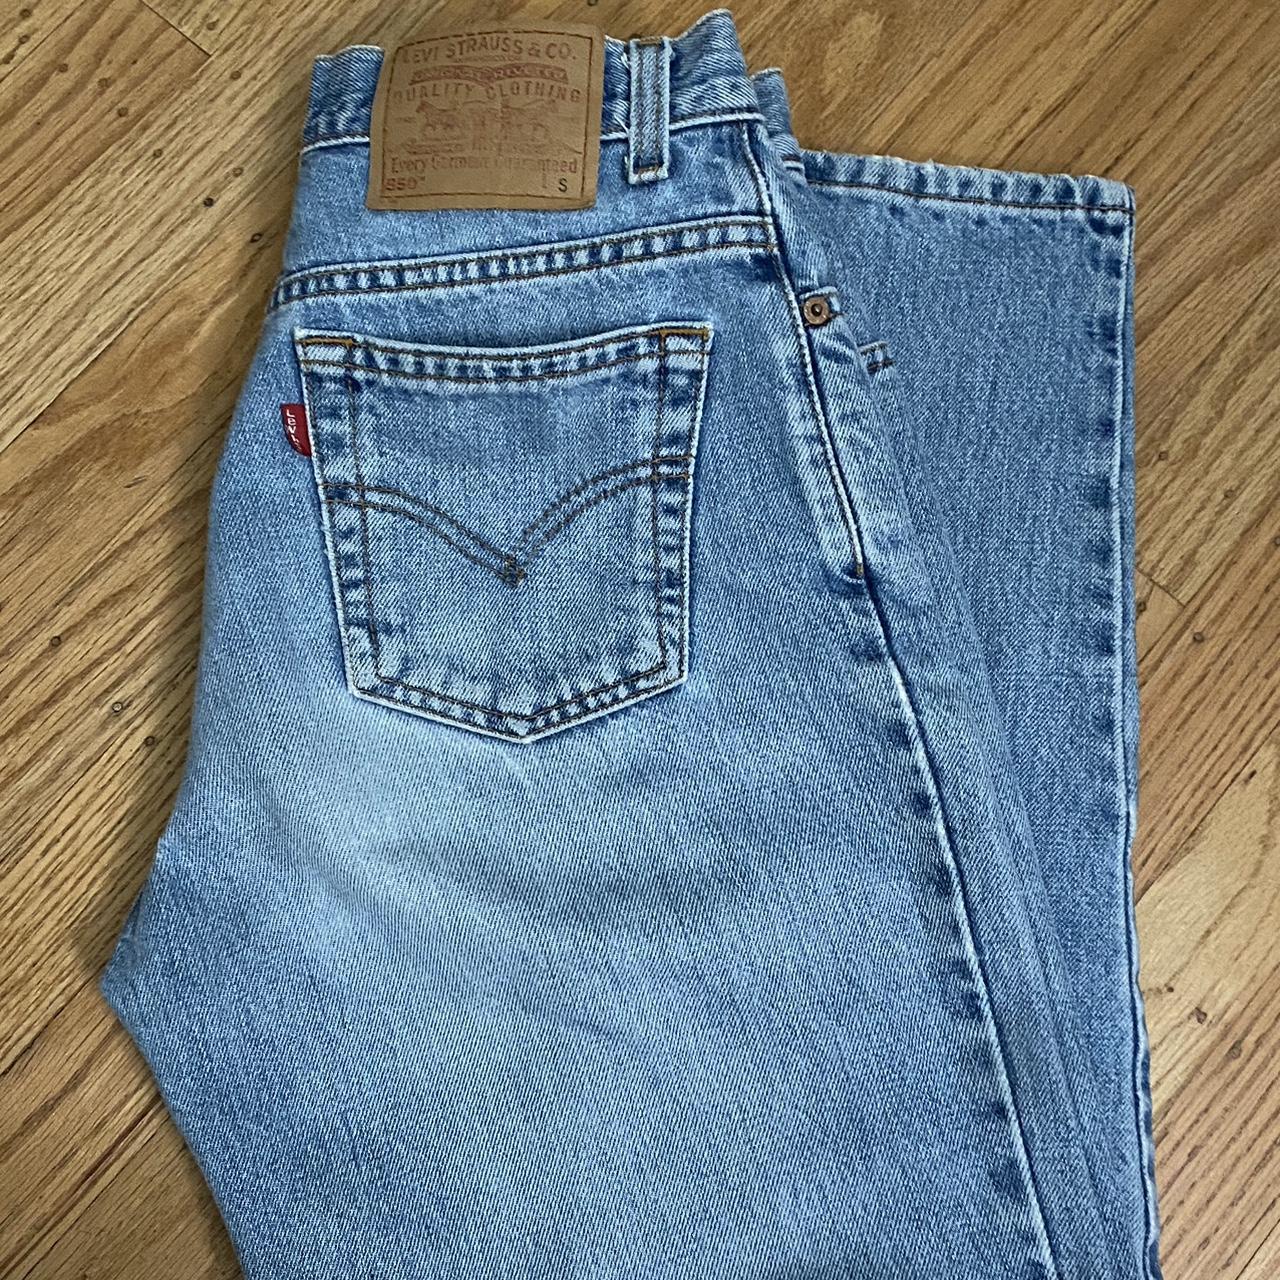 Vintage levis 550 red tag jeans relaxed fit tapered... - Depop